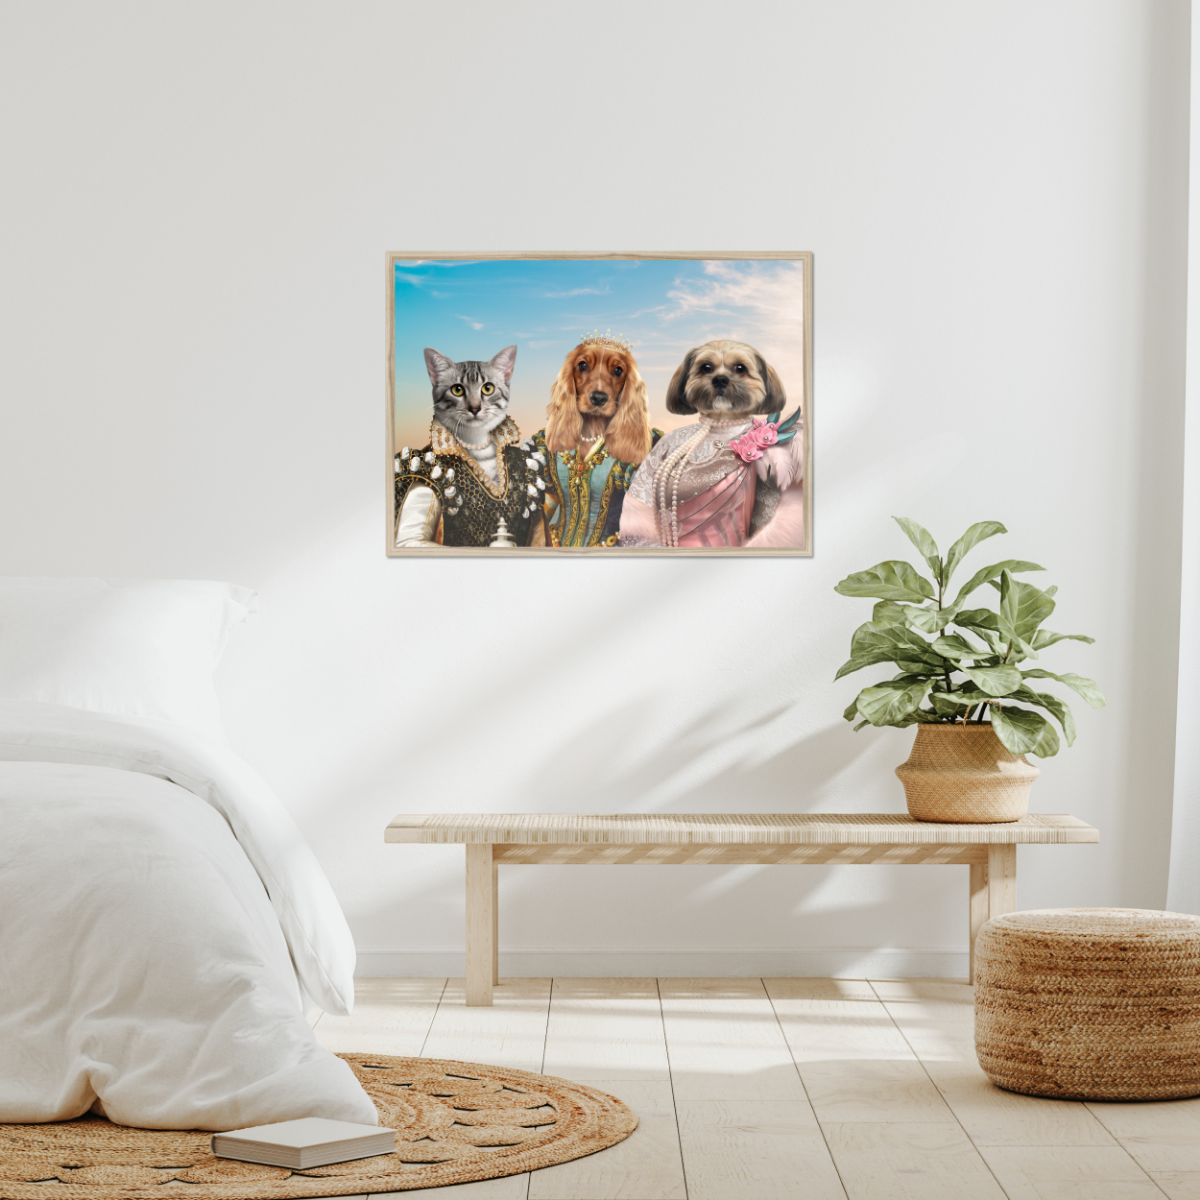 The Girlfriends: Custom 3 Pet Portrait - Paw & Glory, paw and glory, aristocratic dog portraits, personalised dog drawings, pet portraits harry potter, royal painting of your dog, pet portraits artists near me, custom regal pet portraits, pet portrait